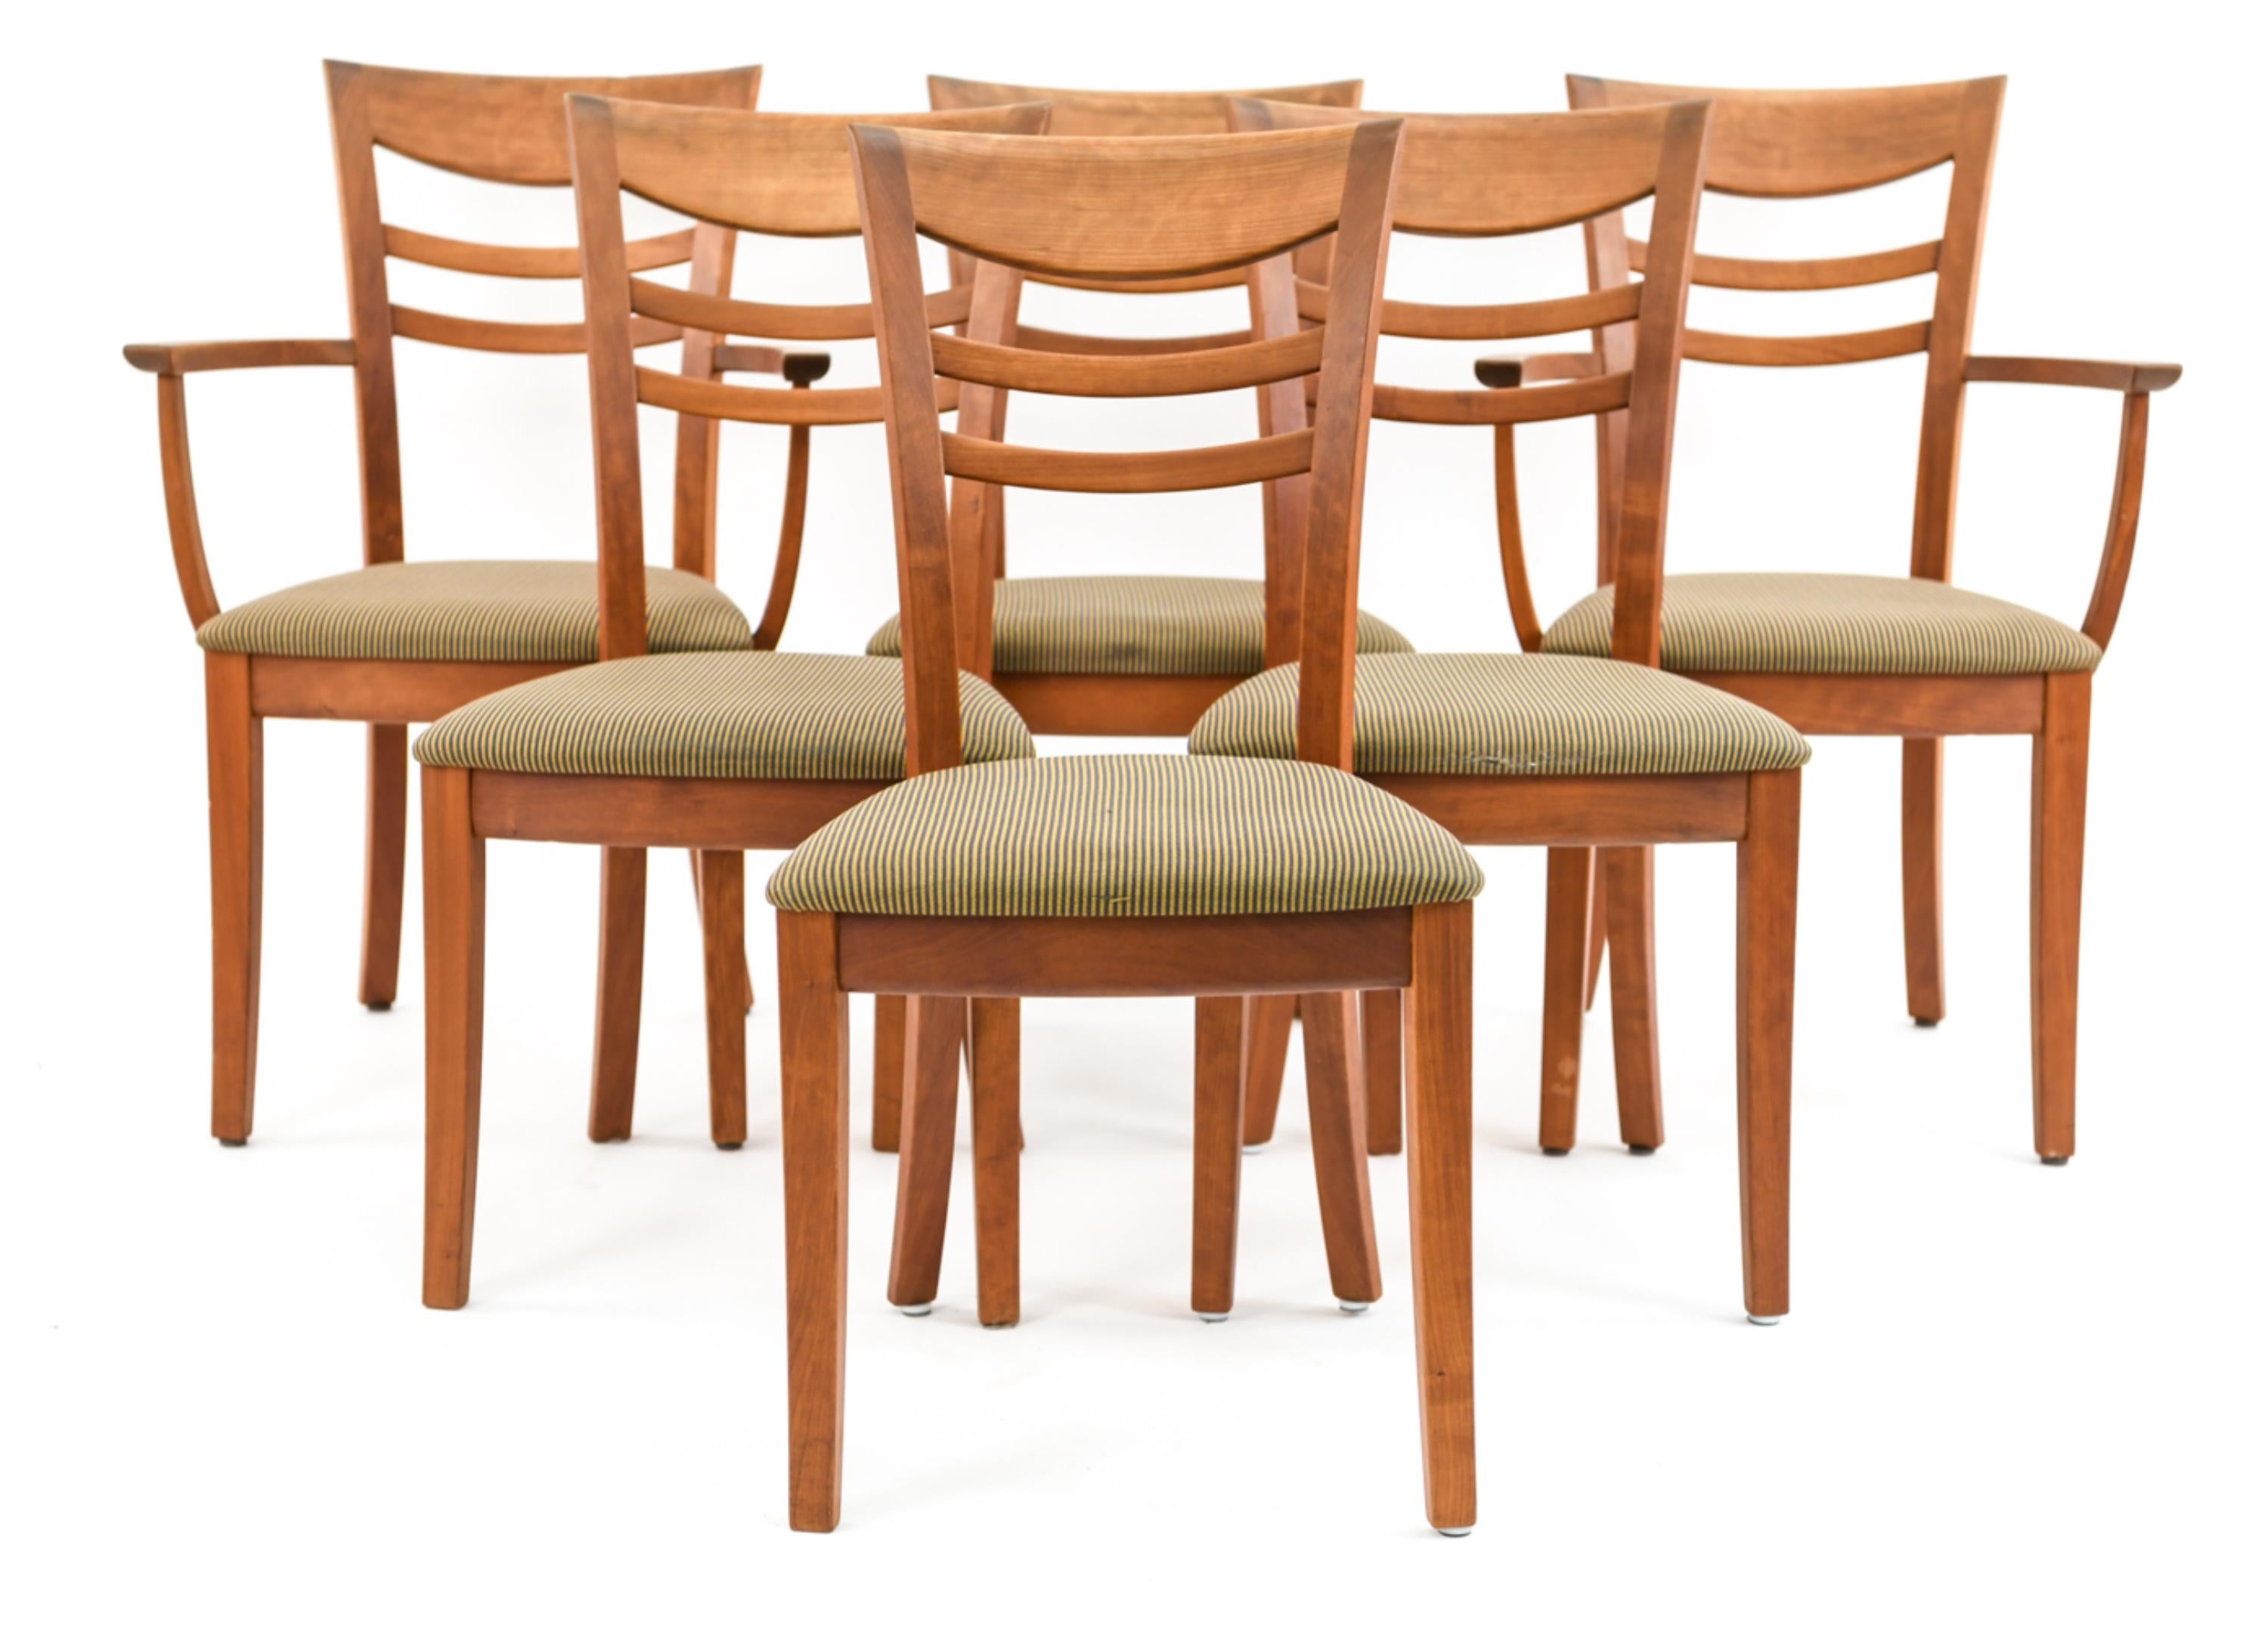 This Danish midcentury dining suite - including a dining table, two armchairs, and four side chairs - was designed by Nissen and Gehl as part of the well-respected Naver collection. The suite features handsome cherrywood and an Art Deco inspired